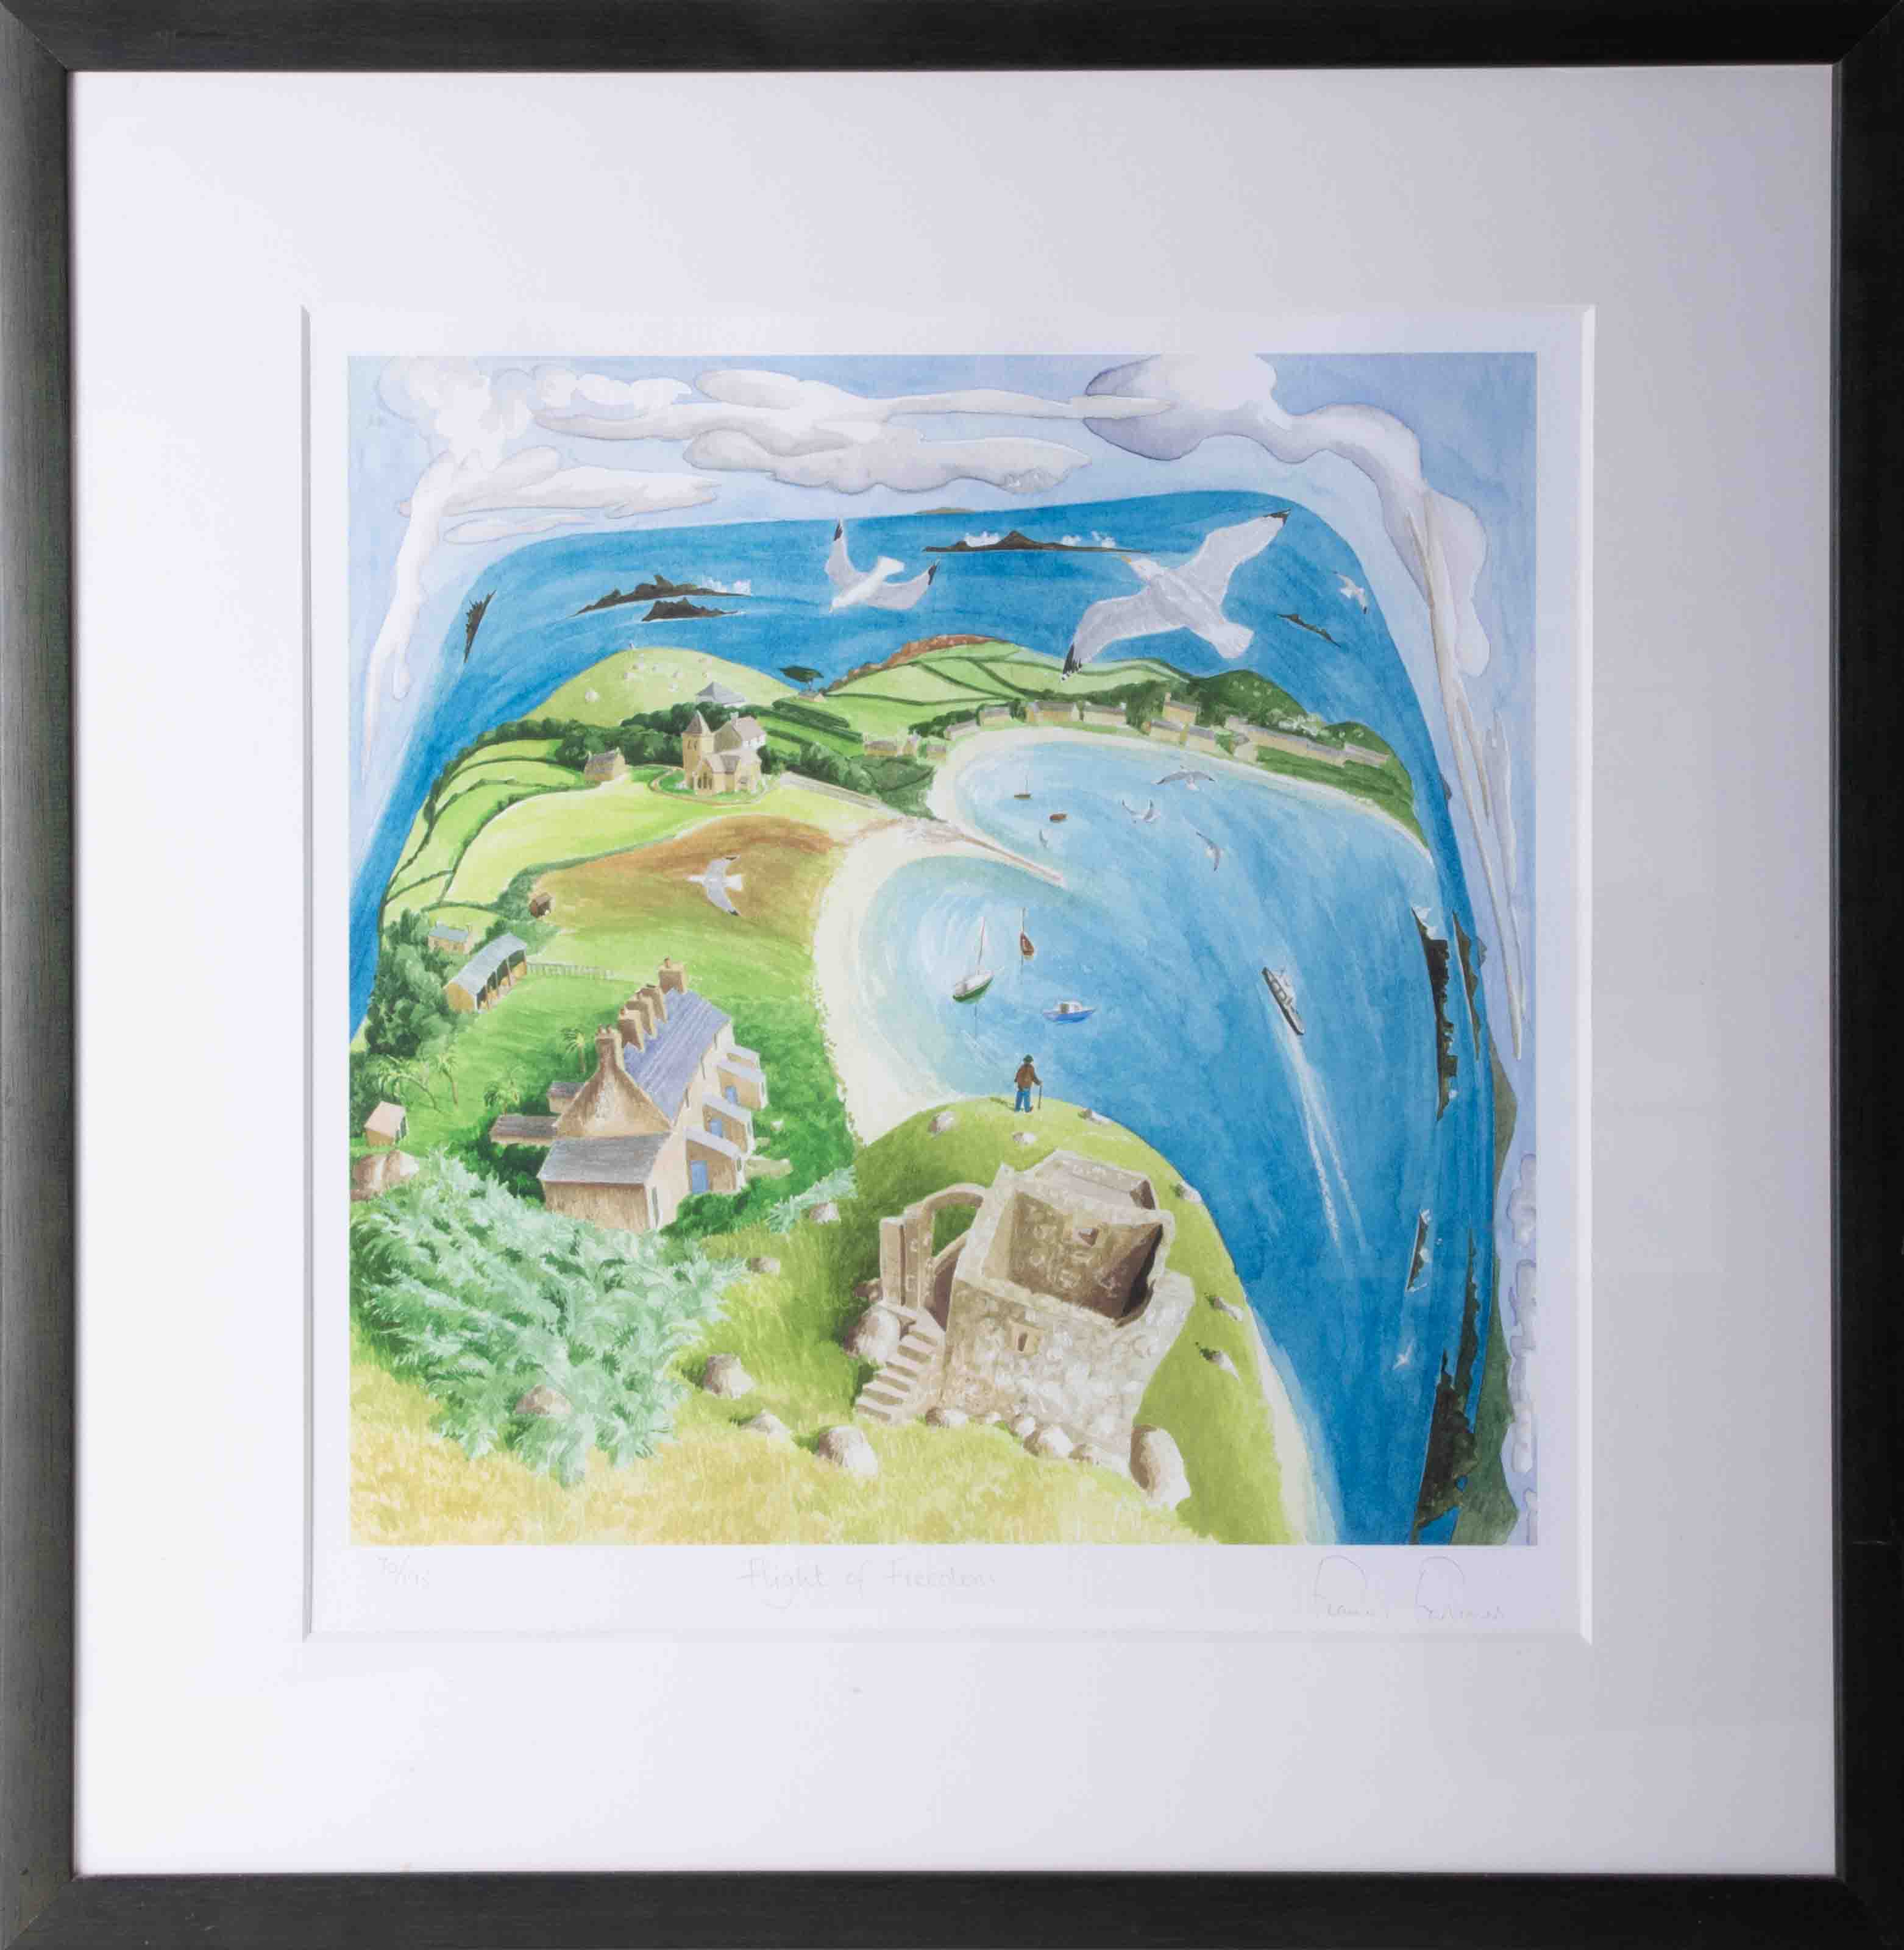 Francis Farmer, 'Flight of Freedom' limited edition print 70/195, signed, 35cm x 35cm, framed and